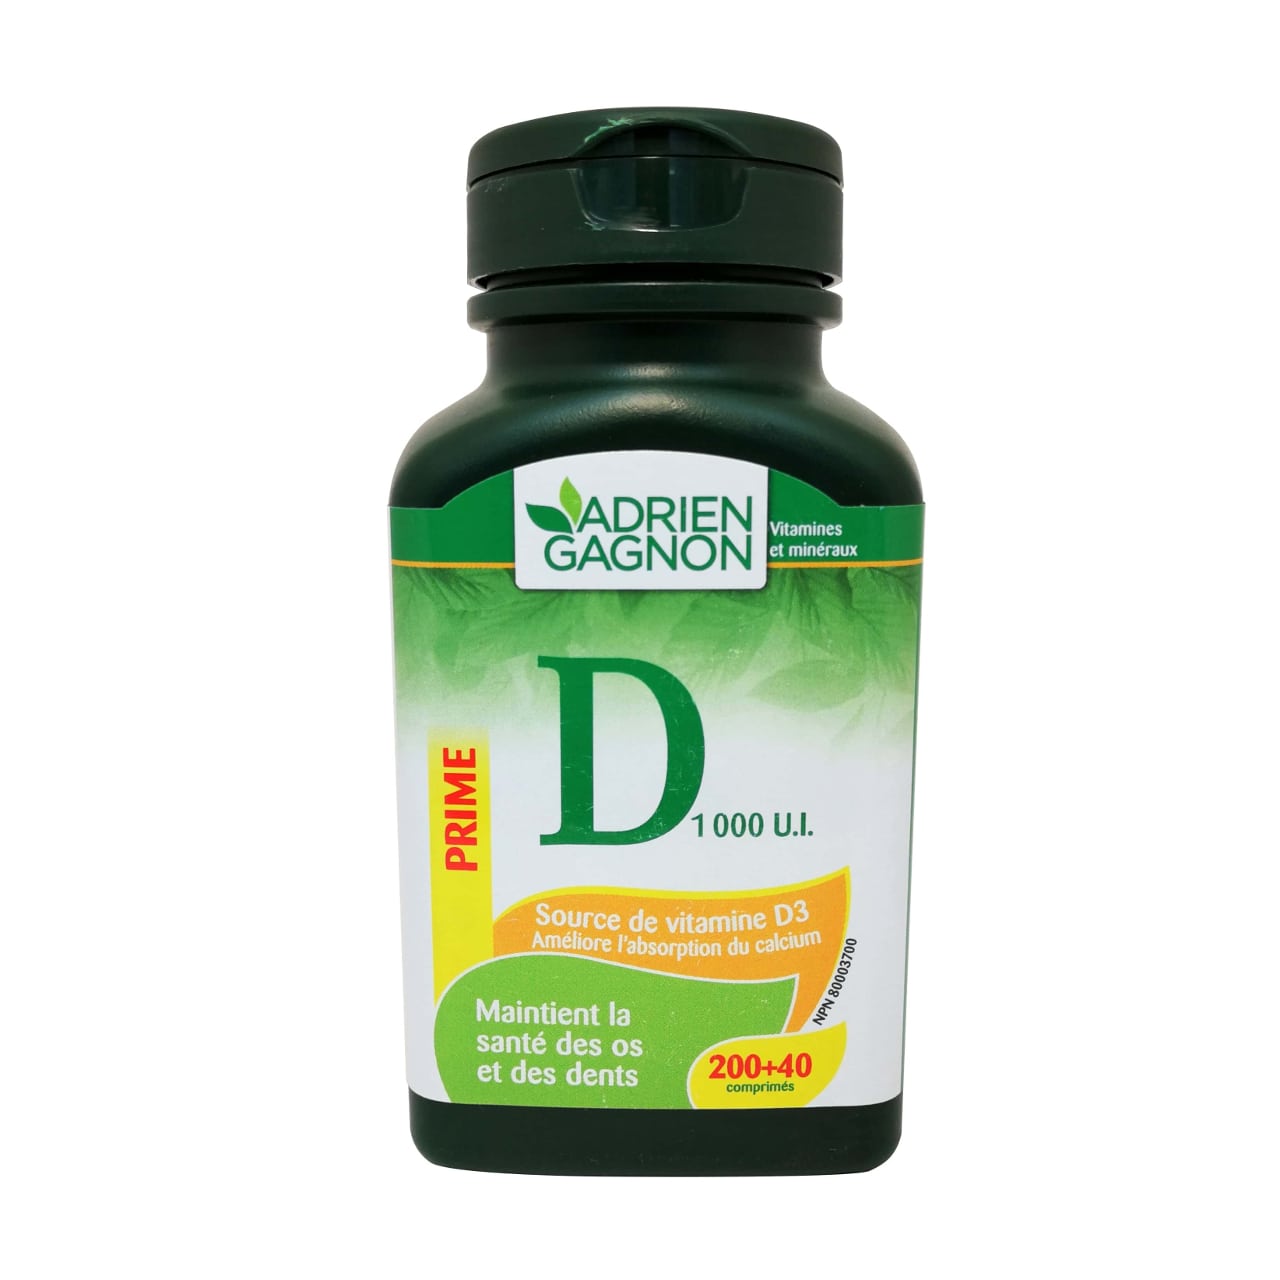 French product label for Adrien Gagnon Vitamin D 1000 IU tablets